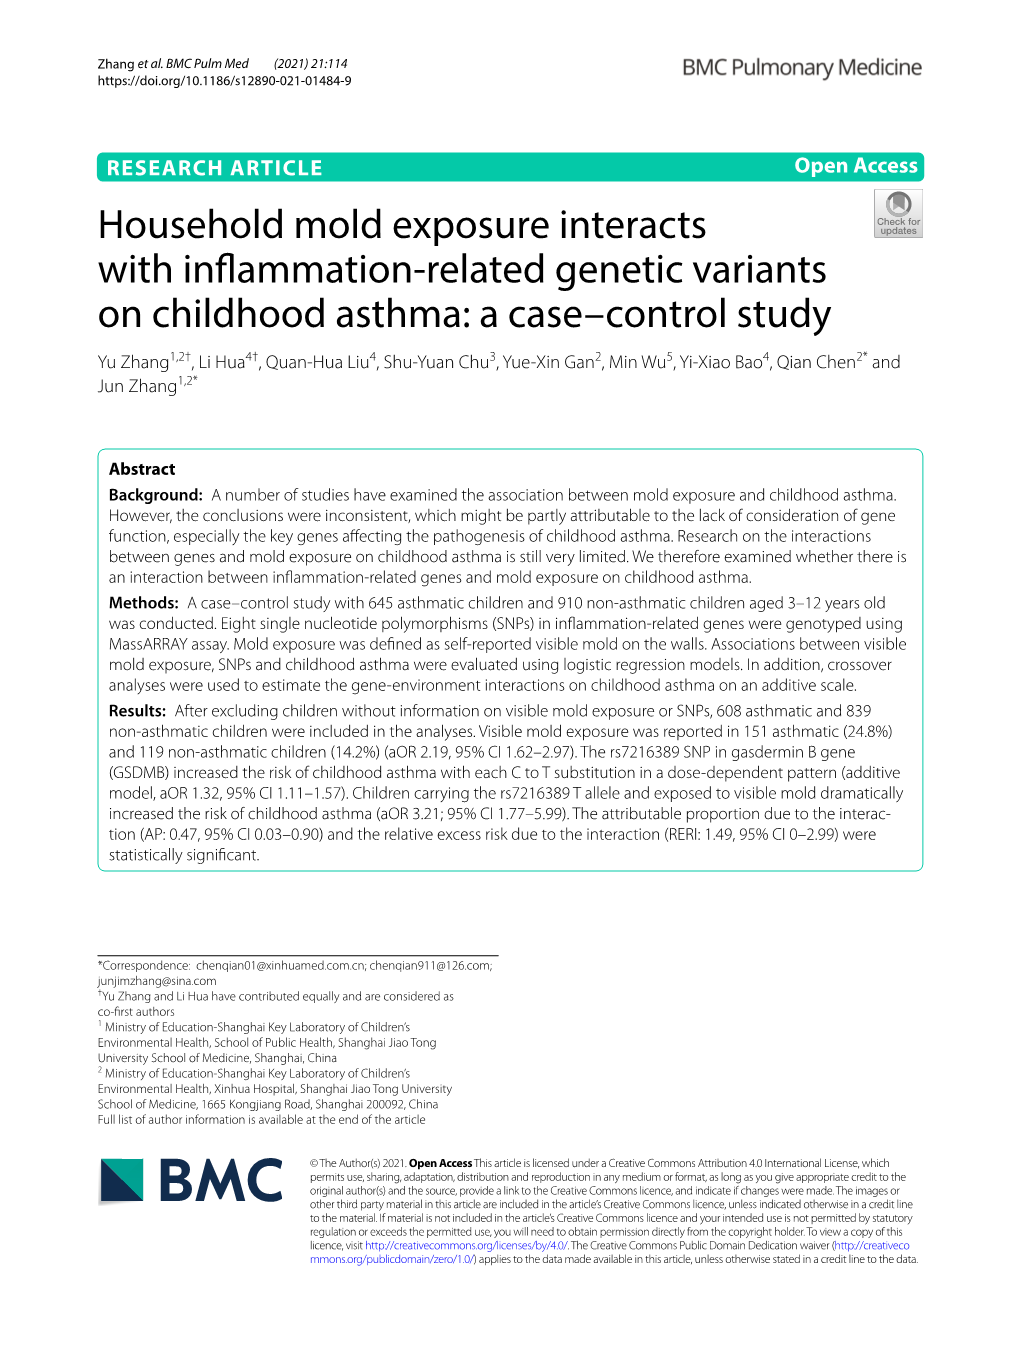 Household Mold Exposure Interacts with Inflammation-Related Genetic